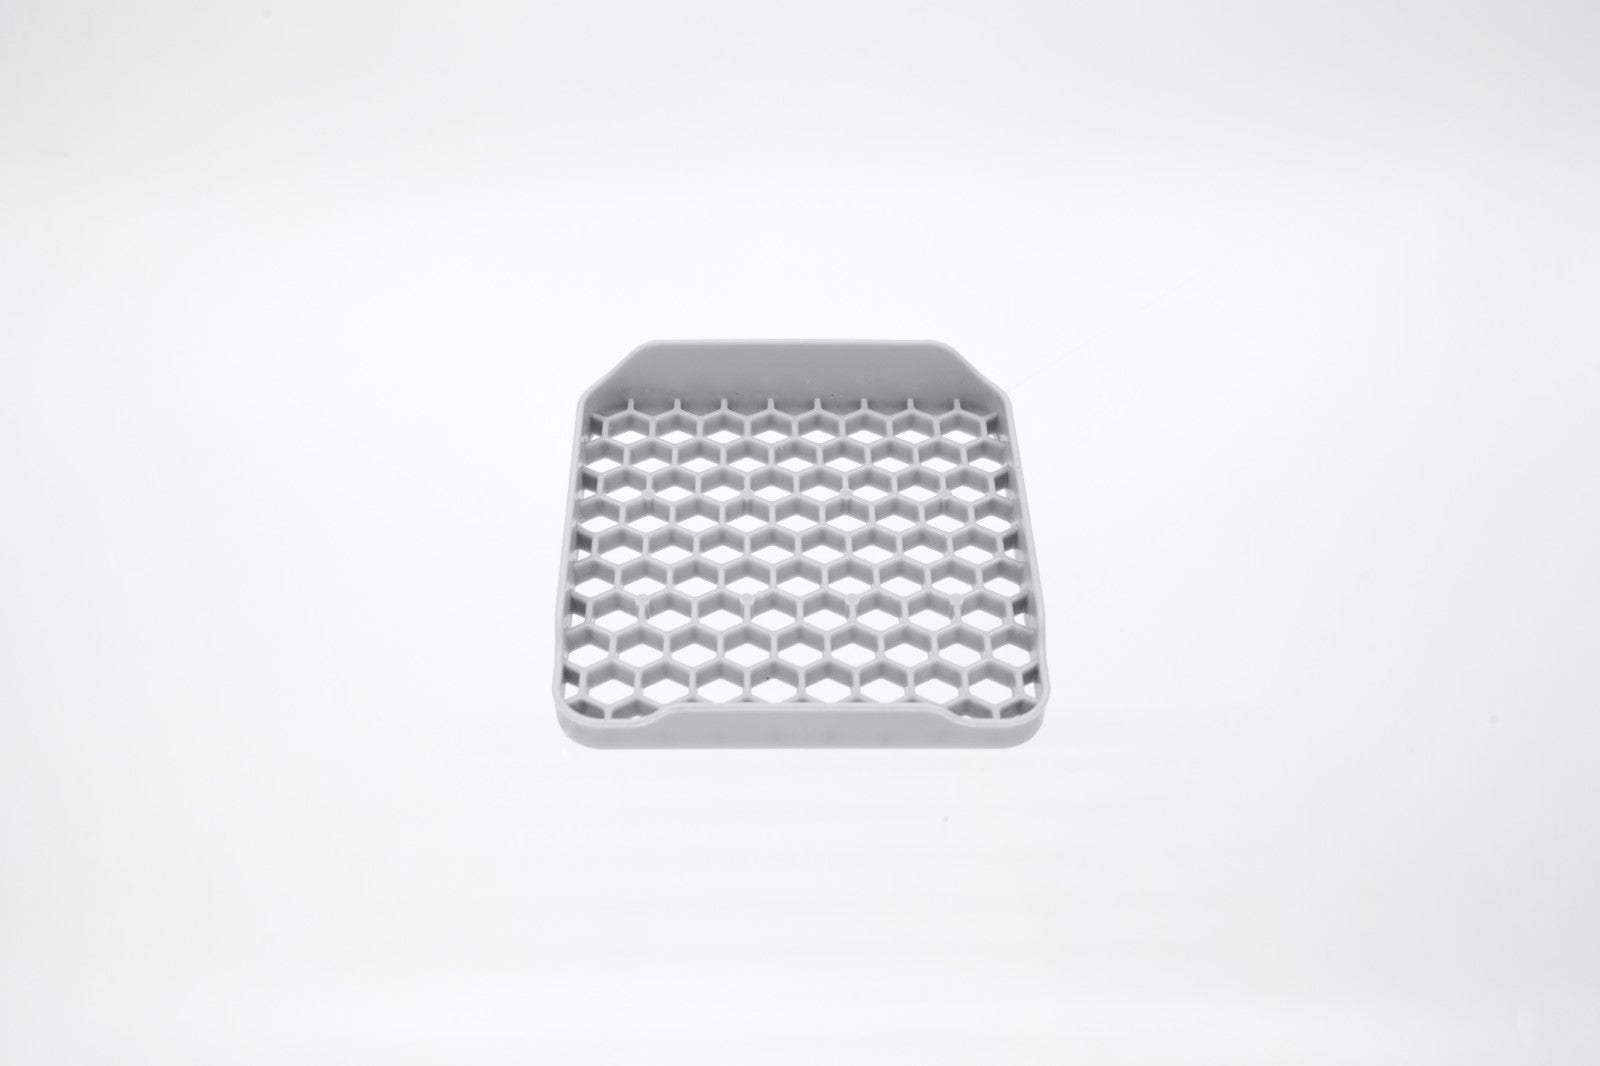 Replacement Honeycomb Grill - micropod